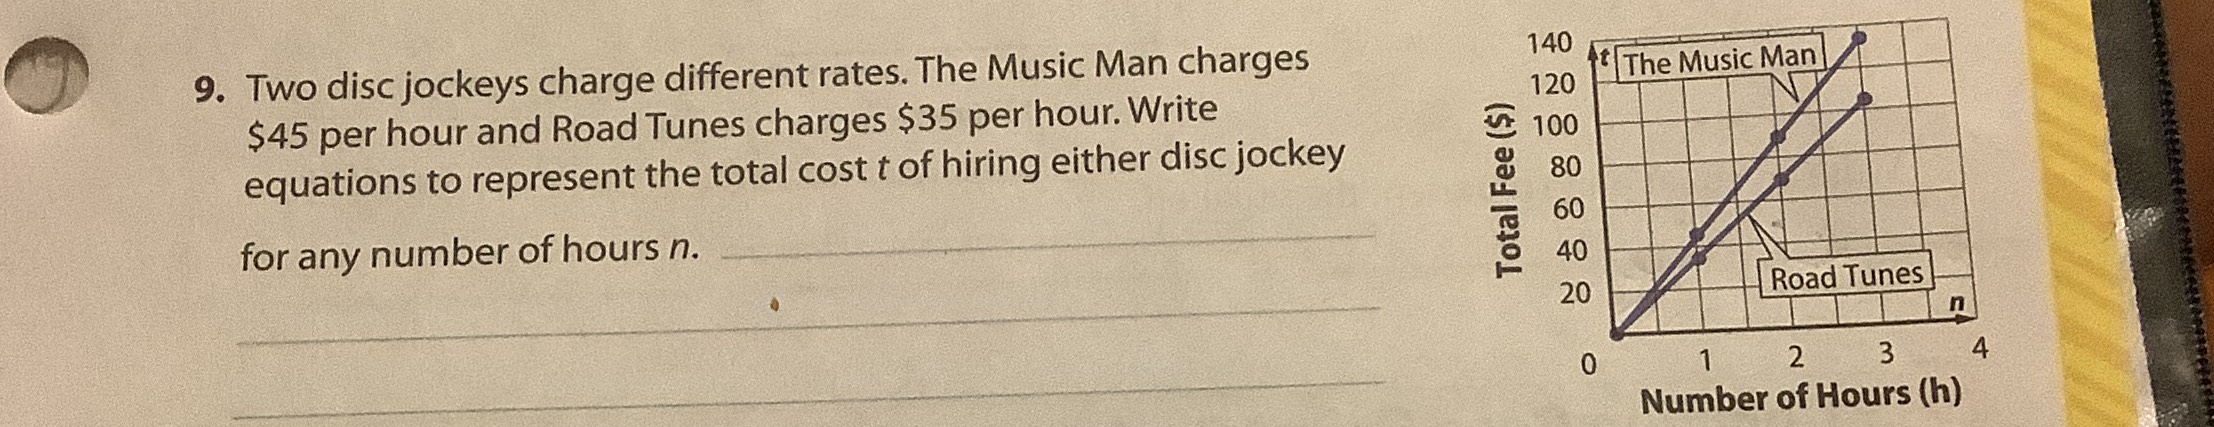 9. Two disc jockeys charge different rates. The Mu...